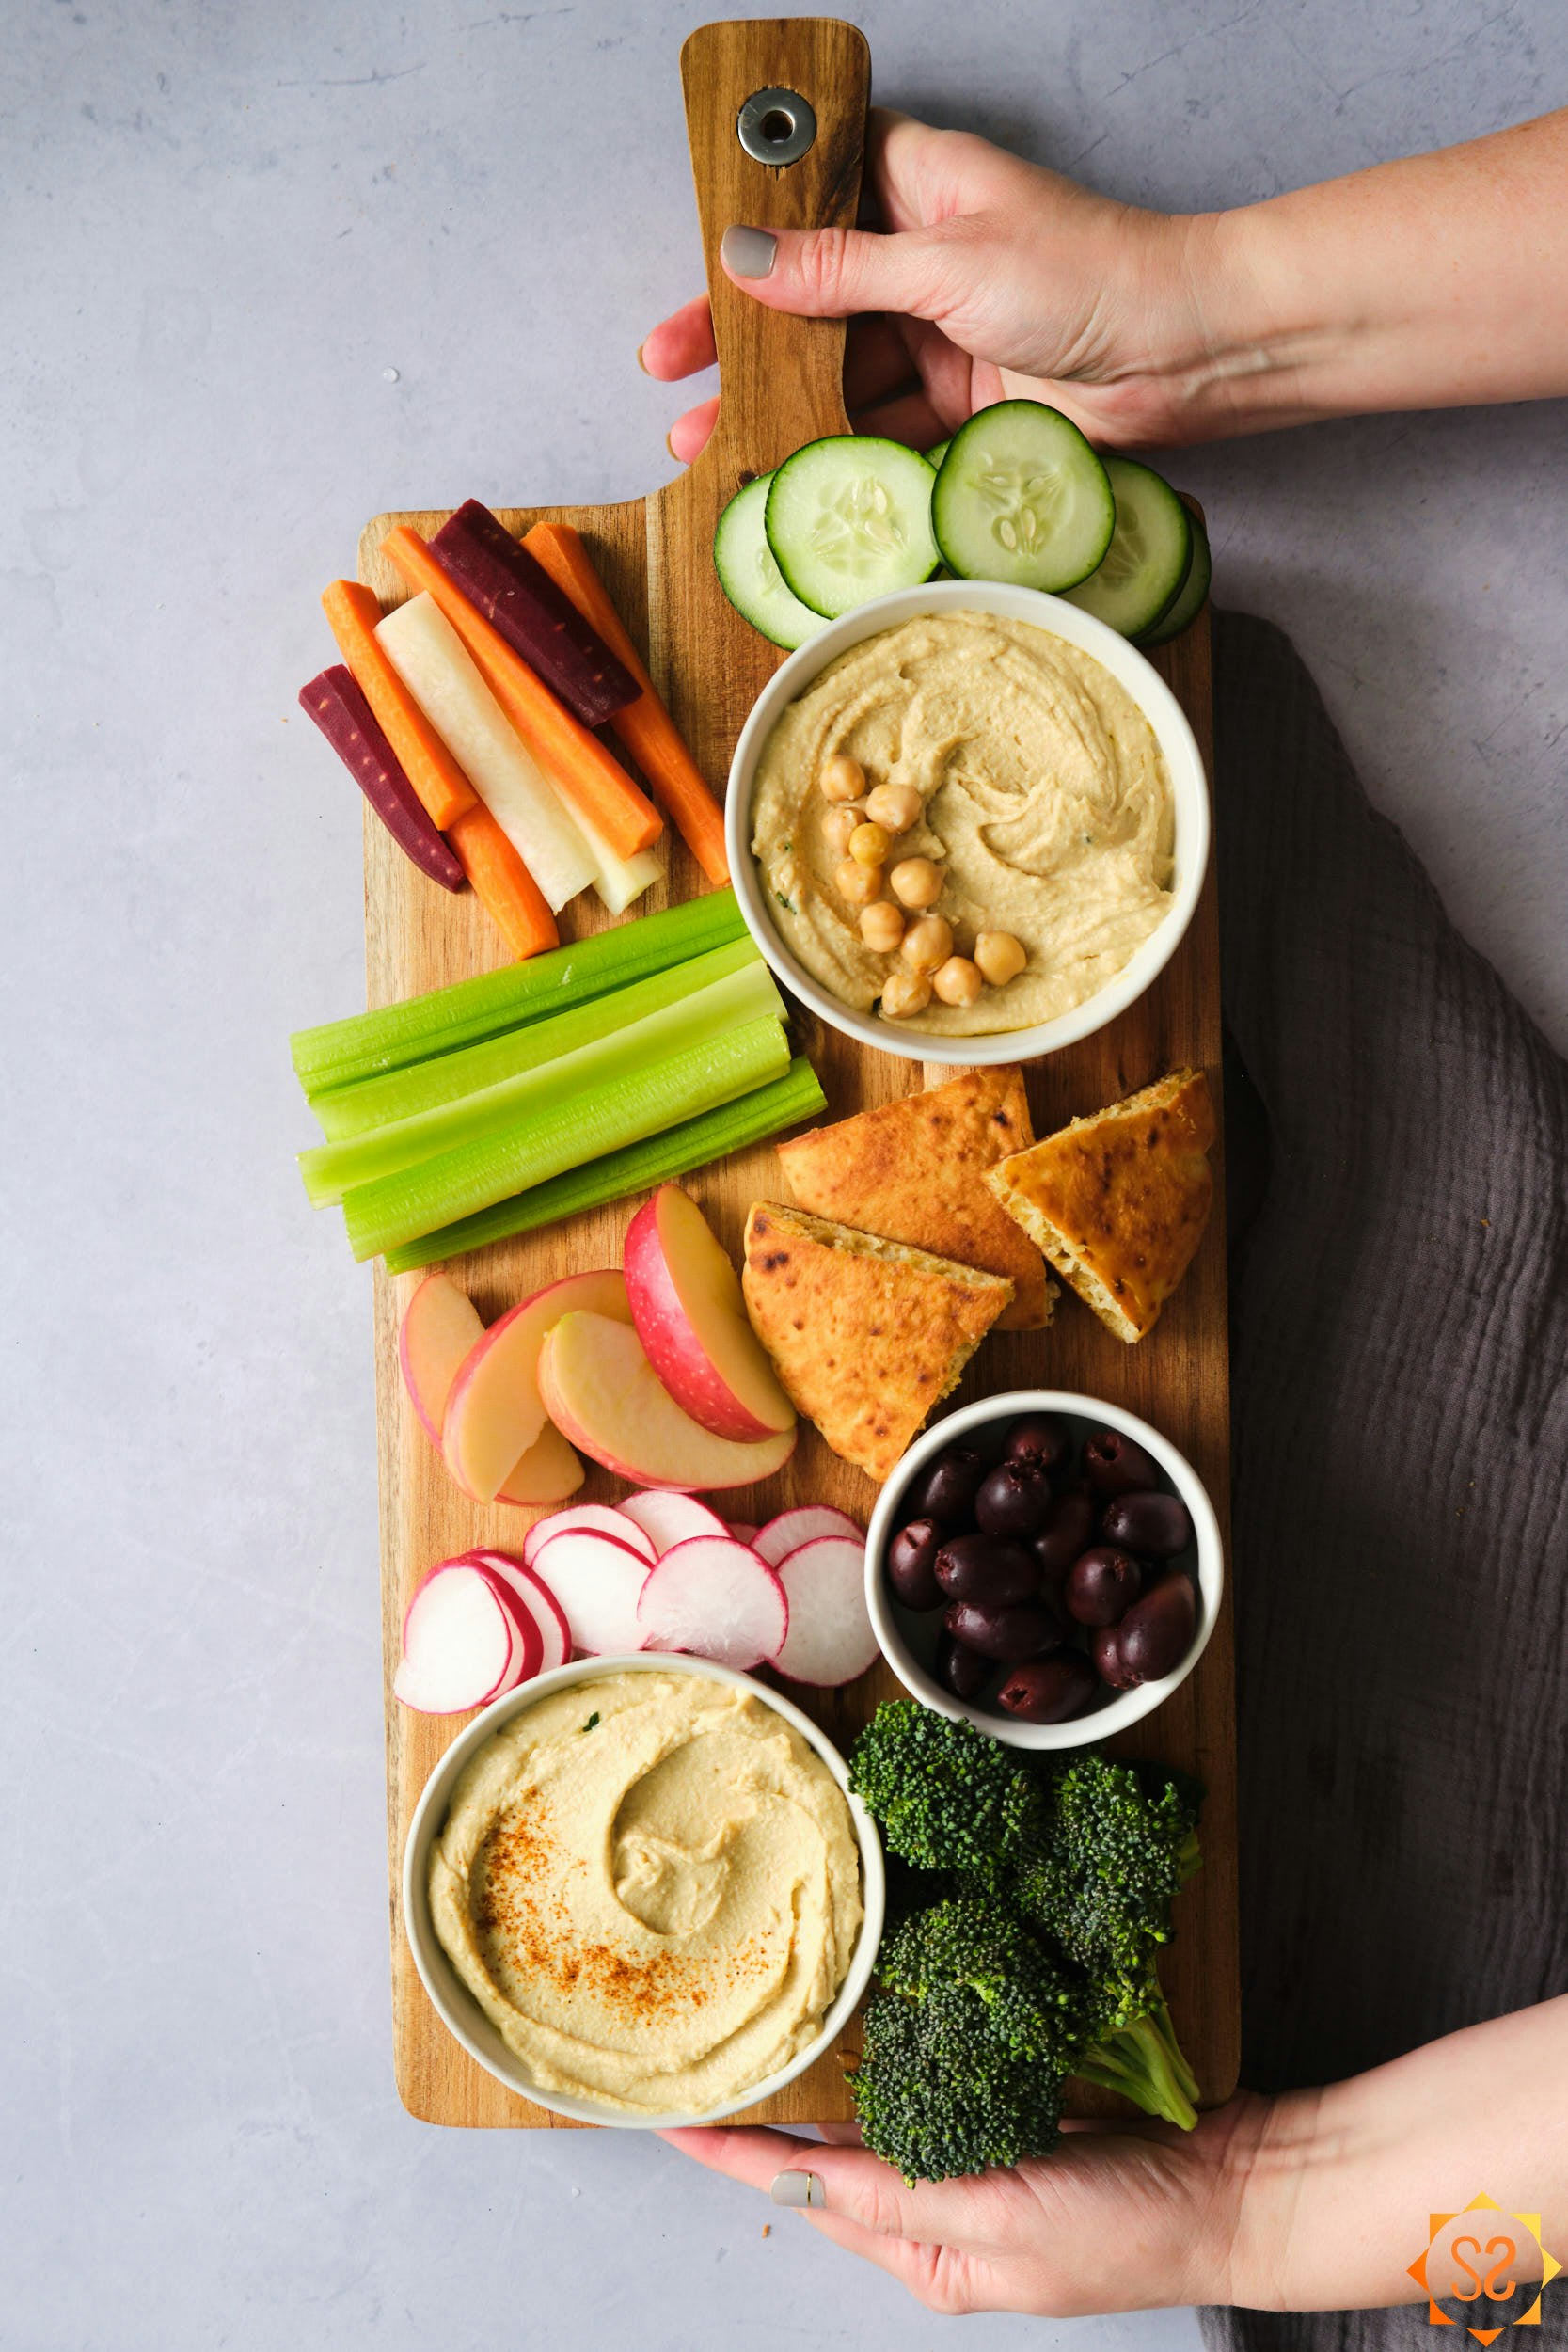 Two hands placing a hummus platter on a table, with two bowls of hummus, olives, vegetables, and pita triangles